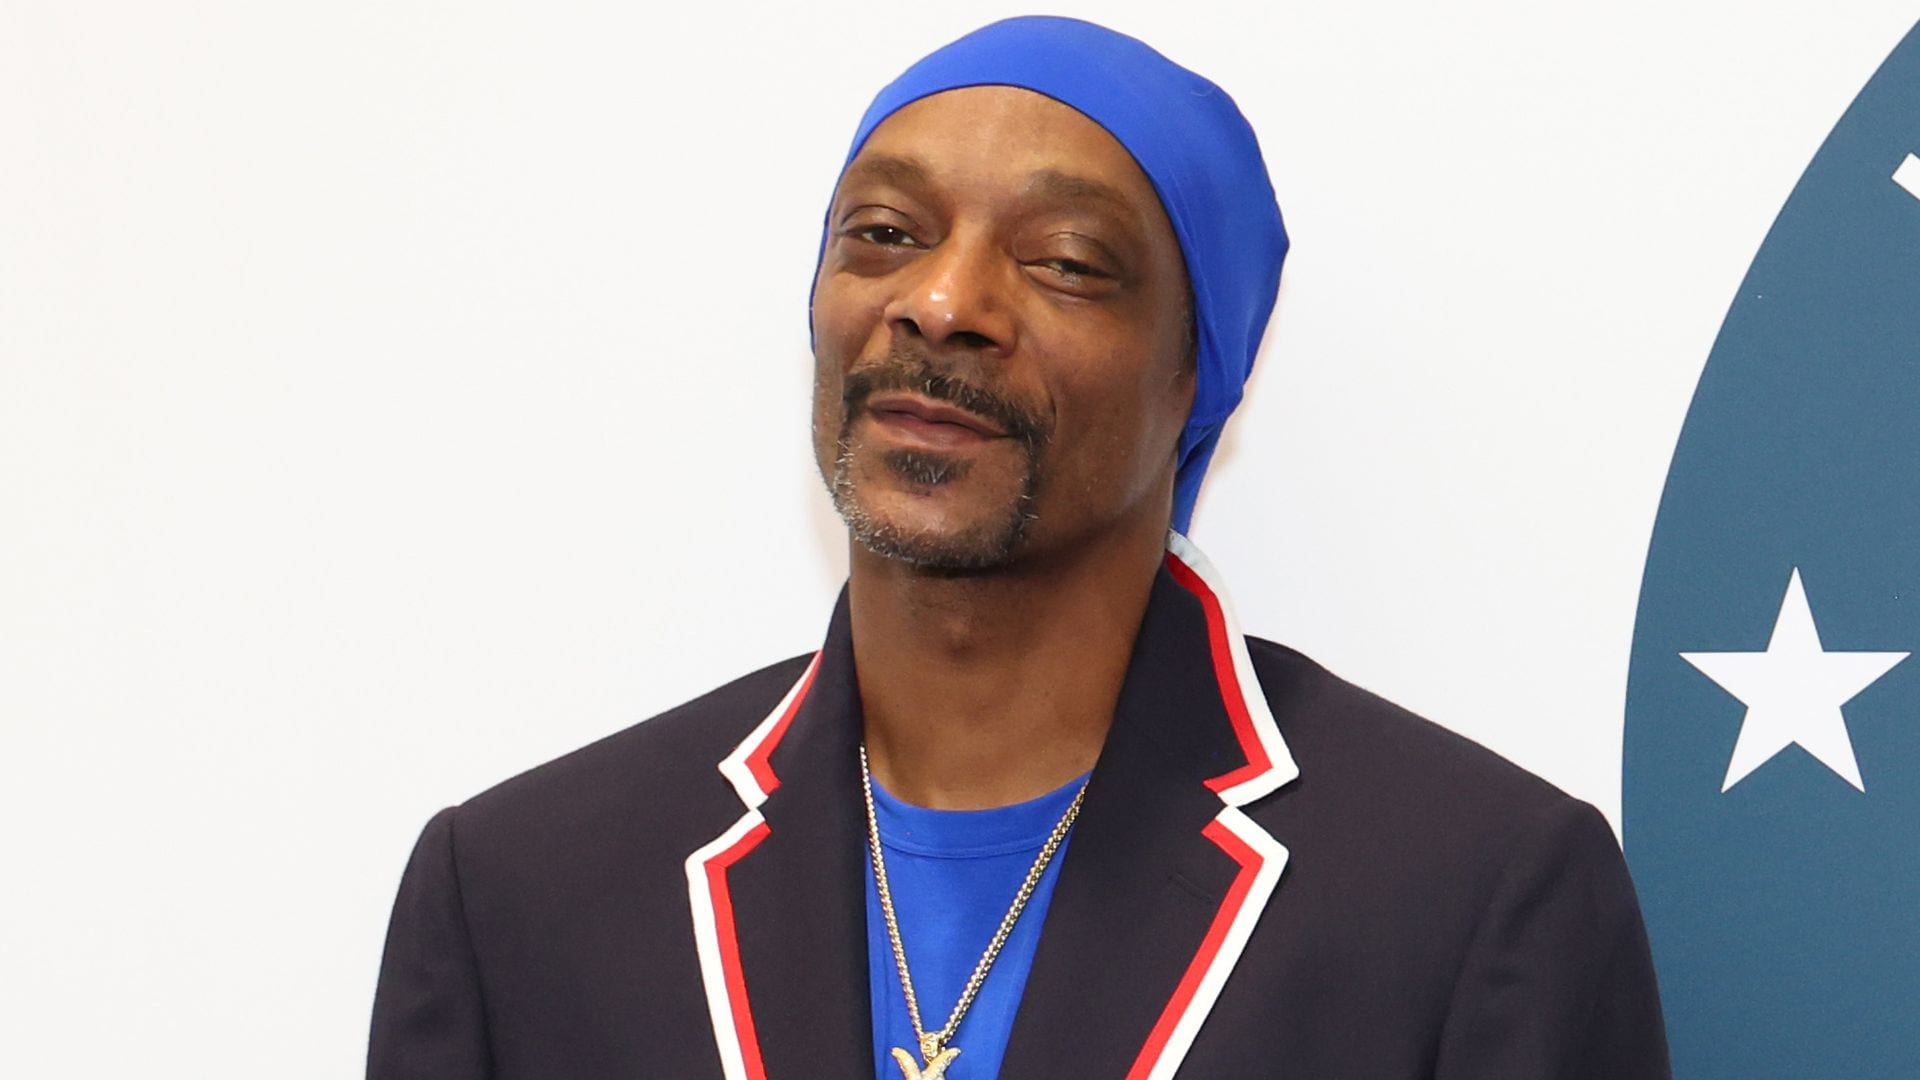 Snoop Dogg will carry the Olympic torch before Friday's opening ceremony